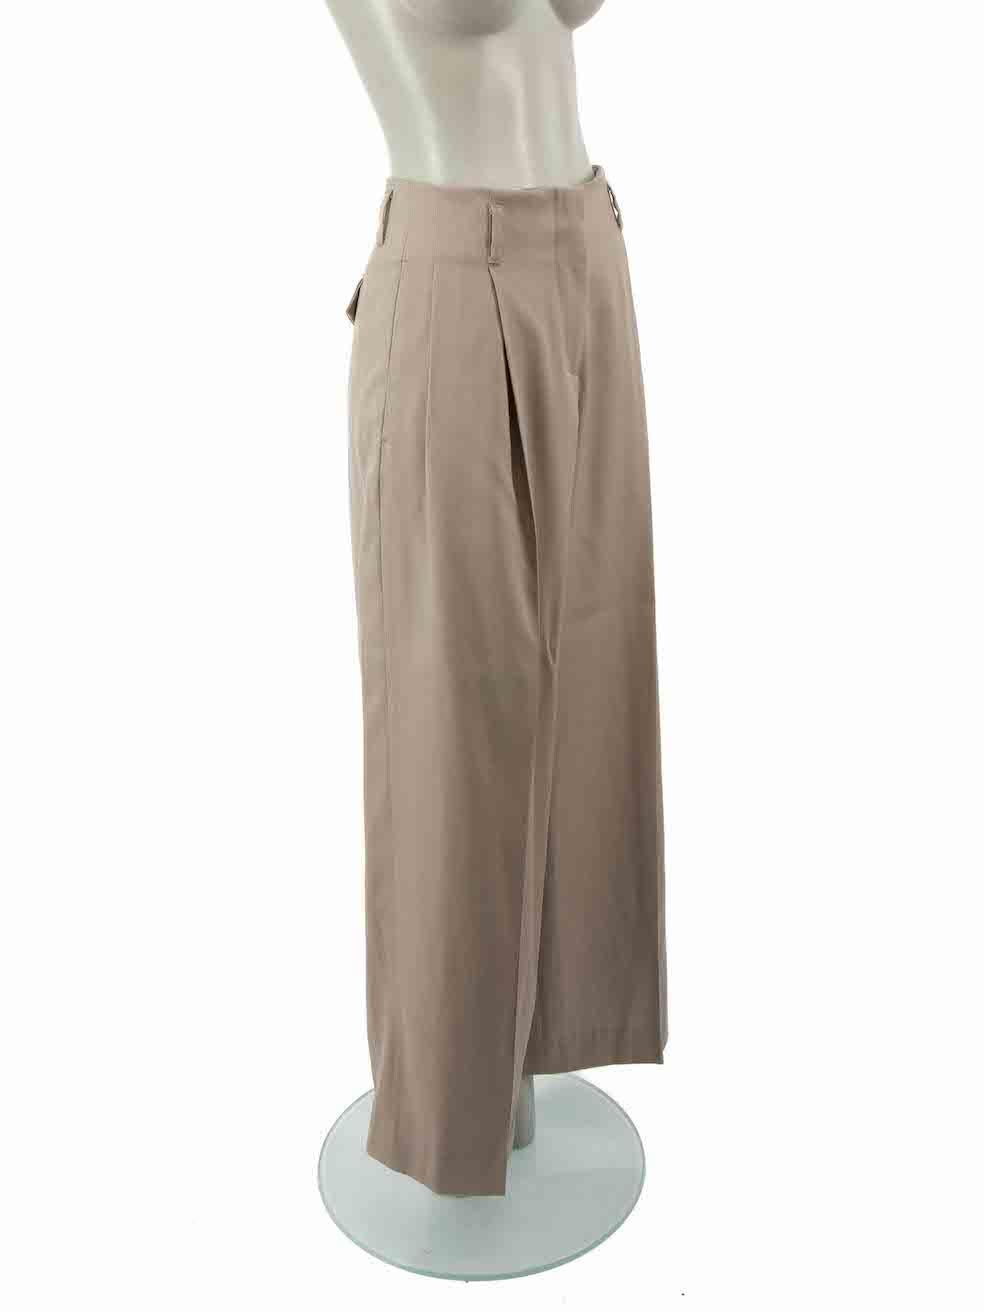 CONDITION is Never worn. No visible wear to trousers is evident on this new Golden Goose designer resale item.
 
Details
Beige
Wool
Wide leg trousers
High rise
Front zip closure with clasp and button
Belt hoops
2x Front side pockets
2x Back pockets